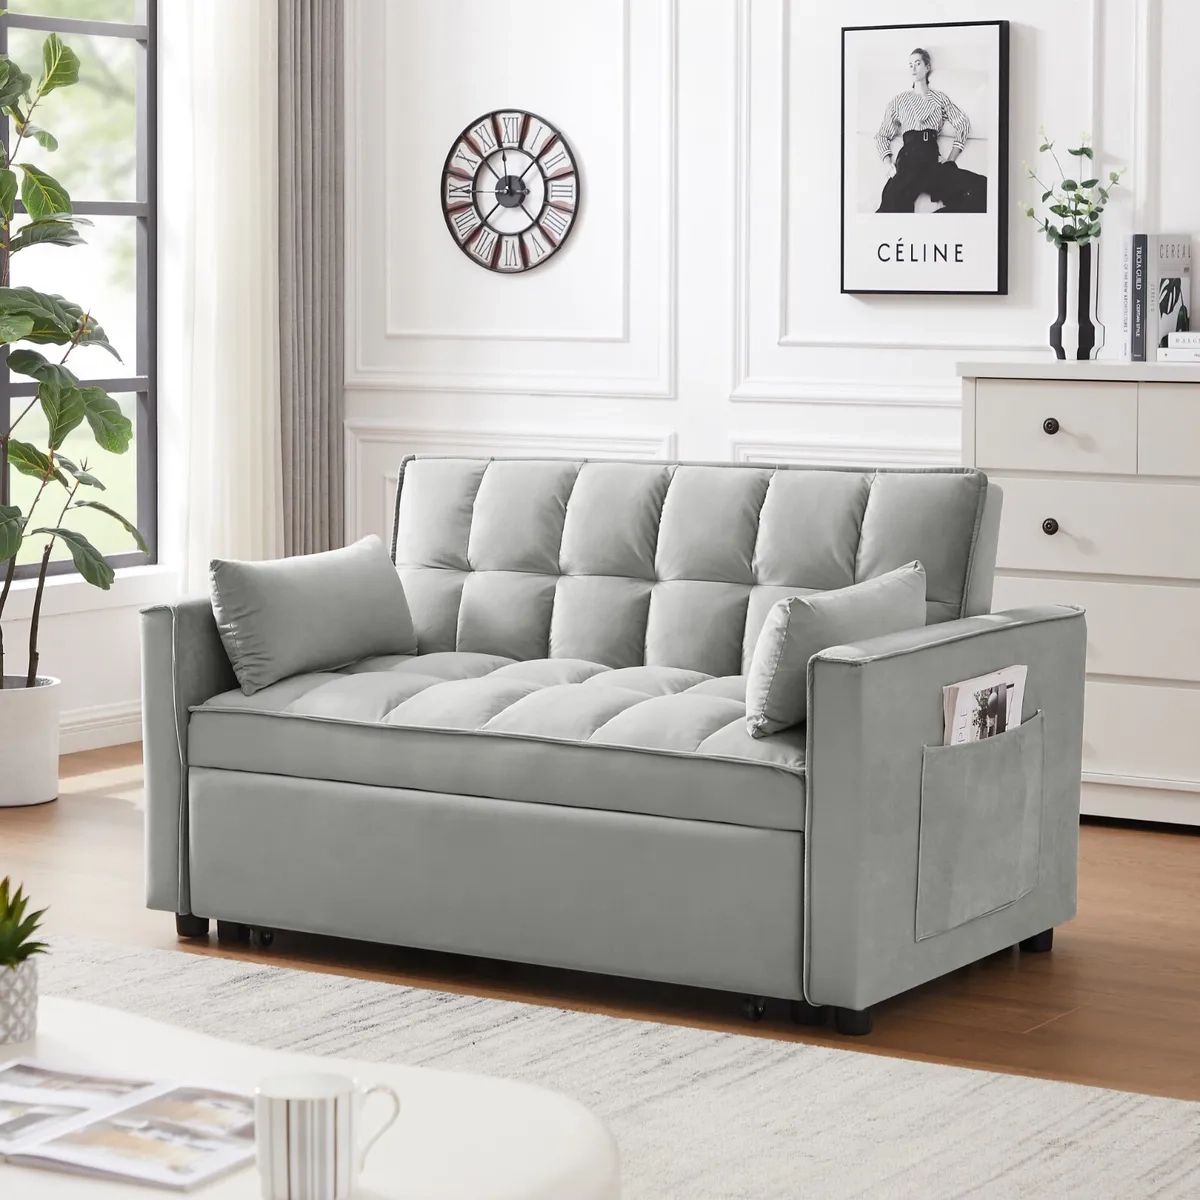 Velvet Futon Sofa Bed With 2 Pillows Convertible Sofa Bed Pull Out Couch  Gray | Ebay Pertaining To 2 In 1 Gray Pull Out Sofa Beds (View 7 of 15)